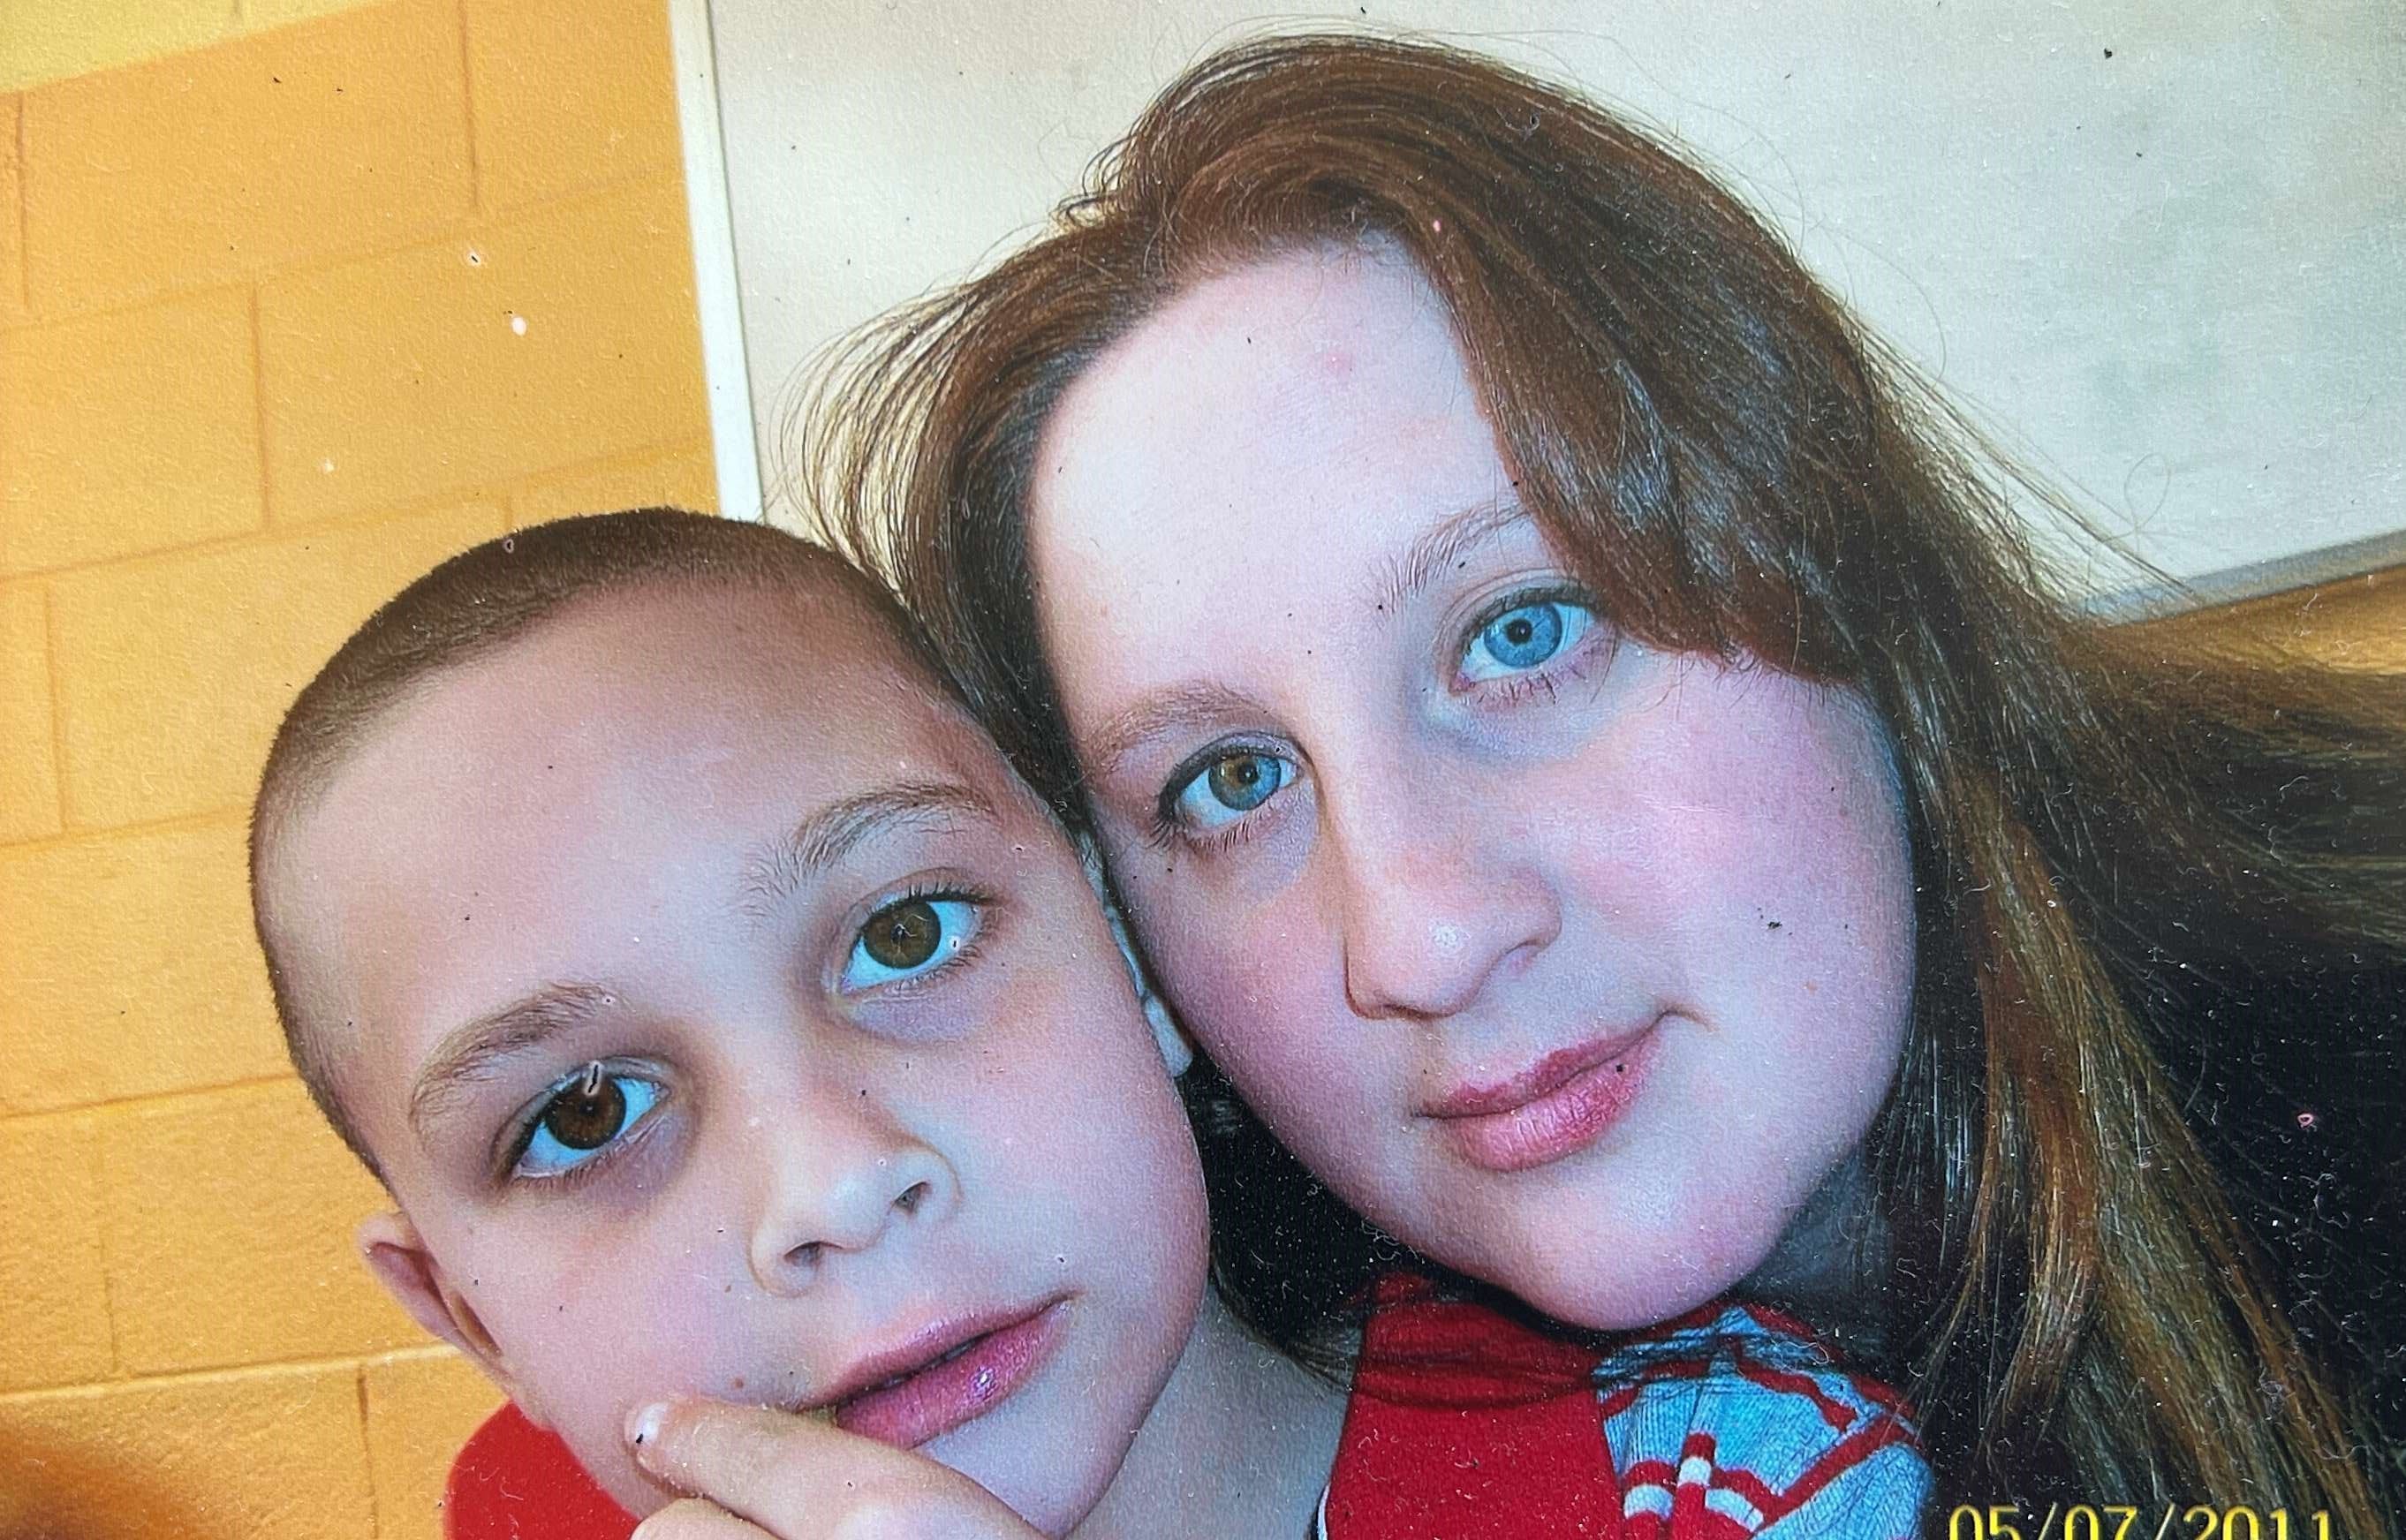 Here's a copy of a photo print from 2011 showing Shahna Stout and her son CJ. It sits on a counter in CJ's room at Renown Medical Center.